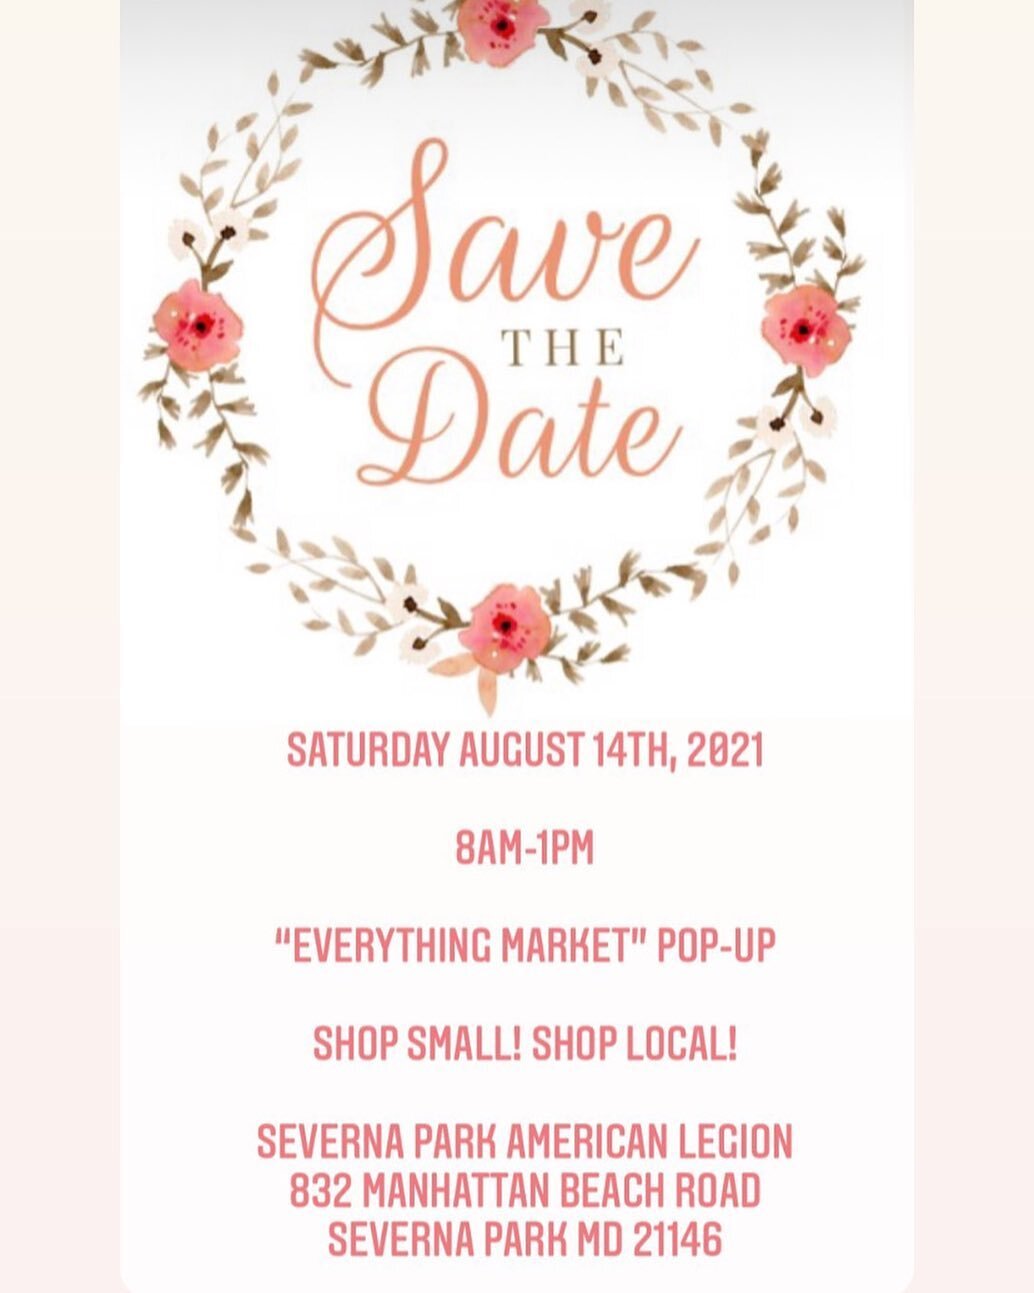 Join Loving the blues for a great pop up event in severna park!!! Stellaluna will also be there too!  Great gifts, apparel, home decor and more!  #buylocal #localartist #apparel #severnapark #annapolis #annapolismaryland #pasadenamd #glenburniemd #ma